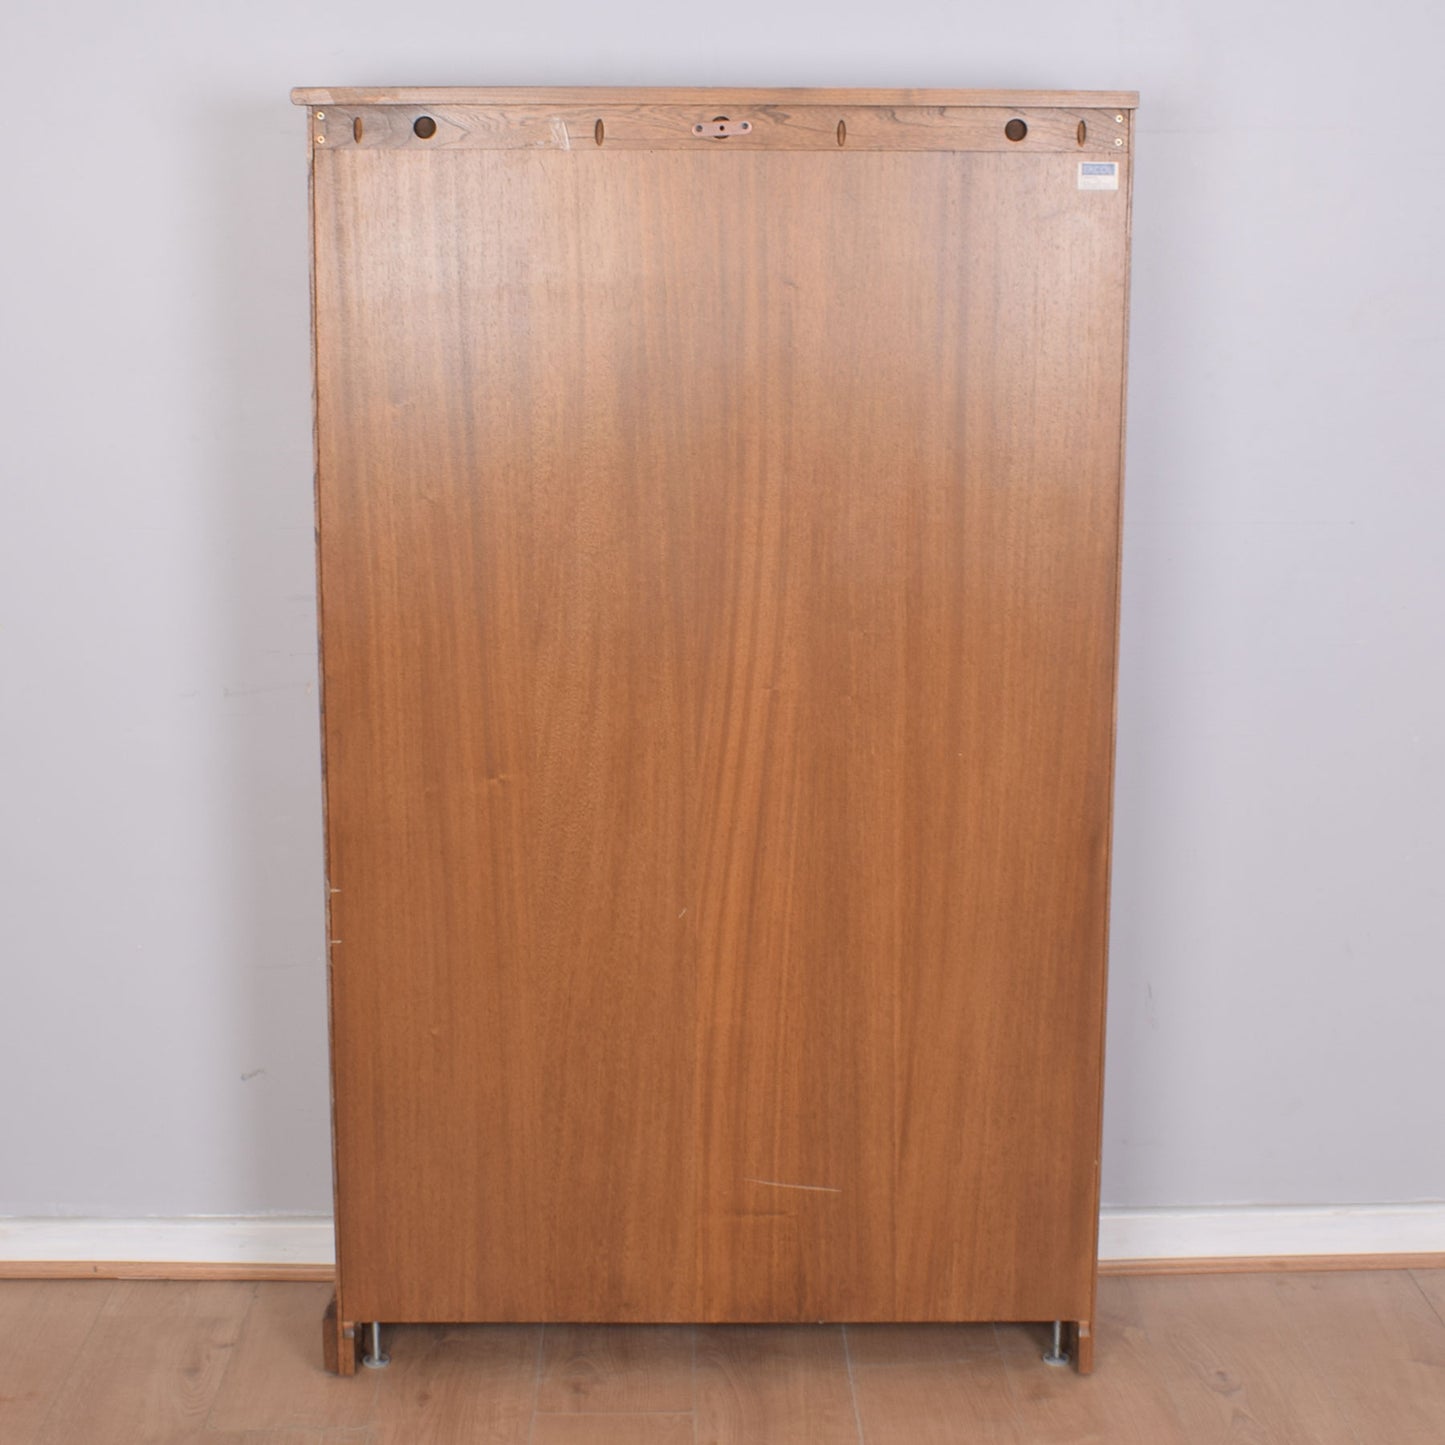 Ercol Bookase with Cupboard